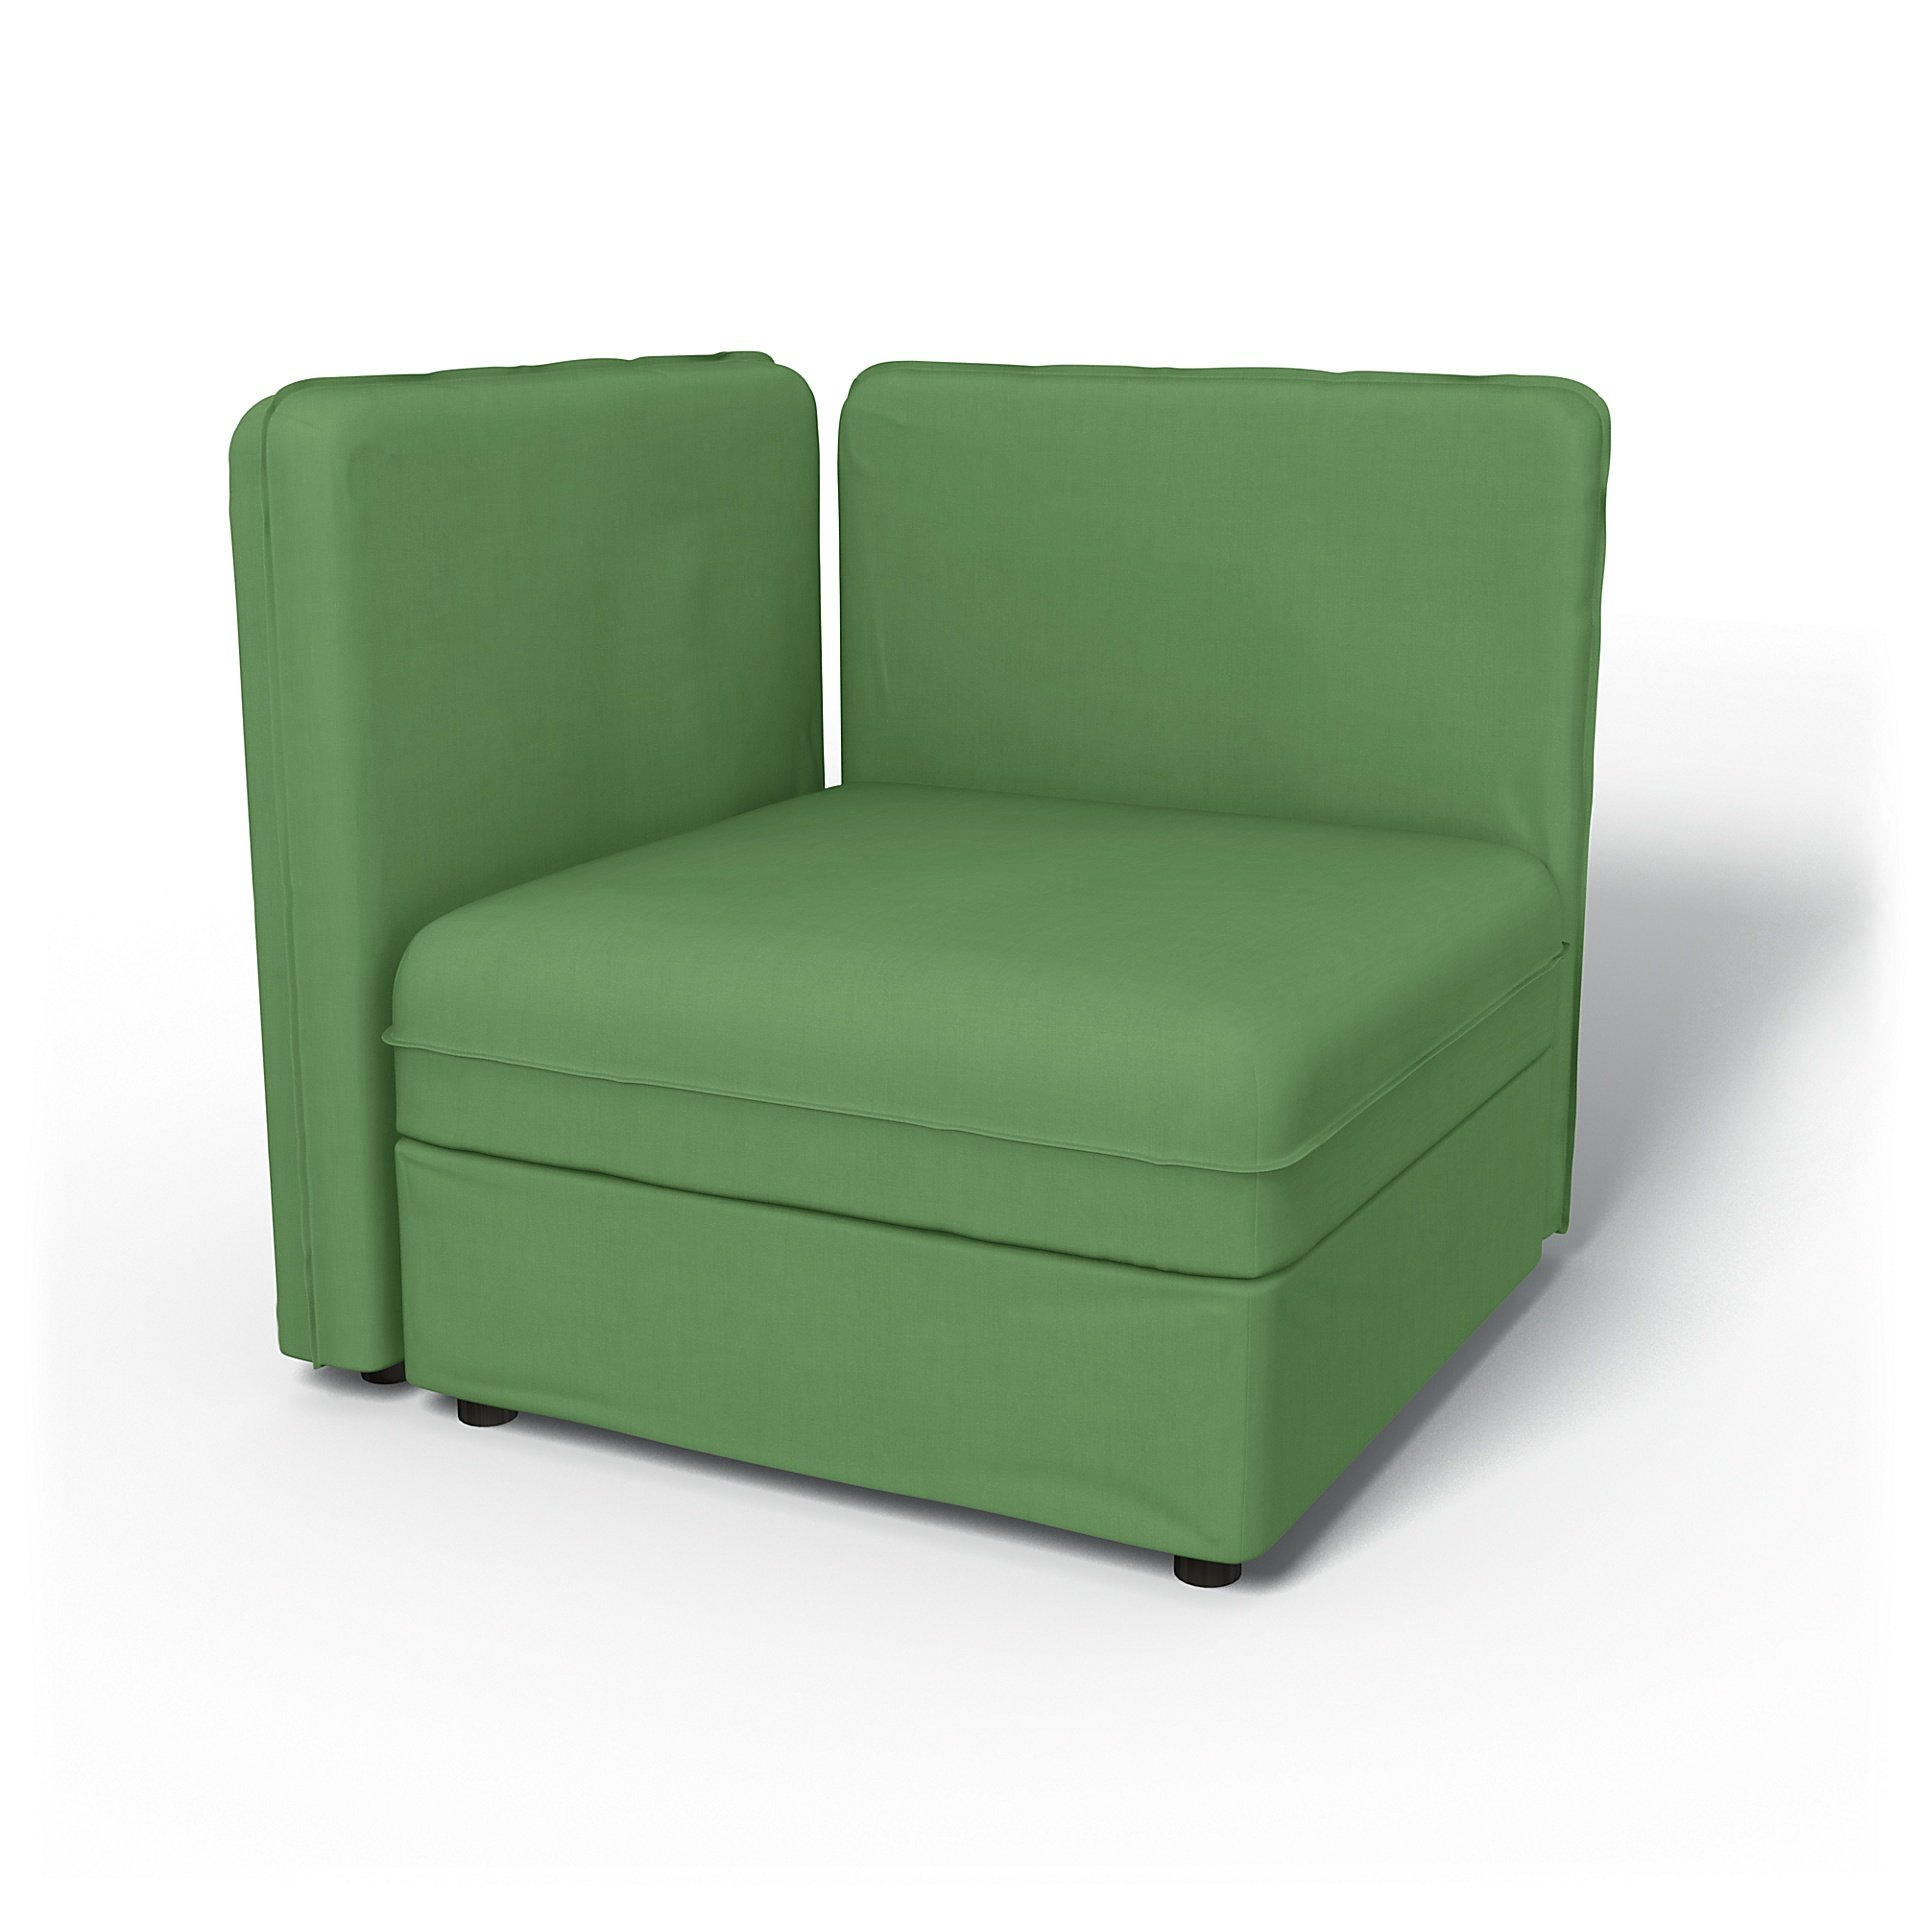 IKEA - Vallentuna Seat Module with Low Back and Storage Cover 80x80cm 32x32in, Apple Green, Linen - 